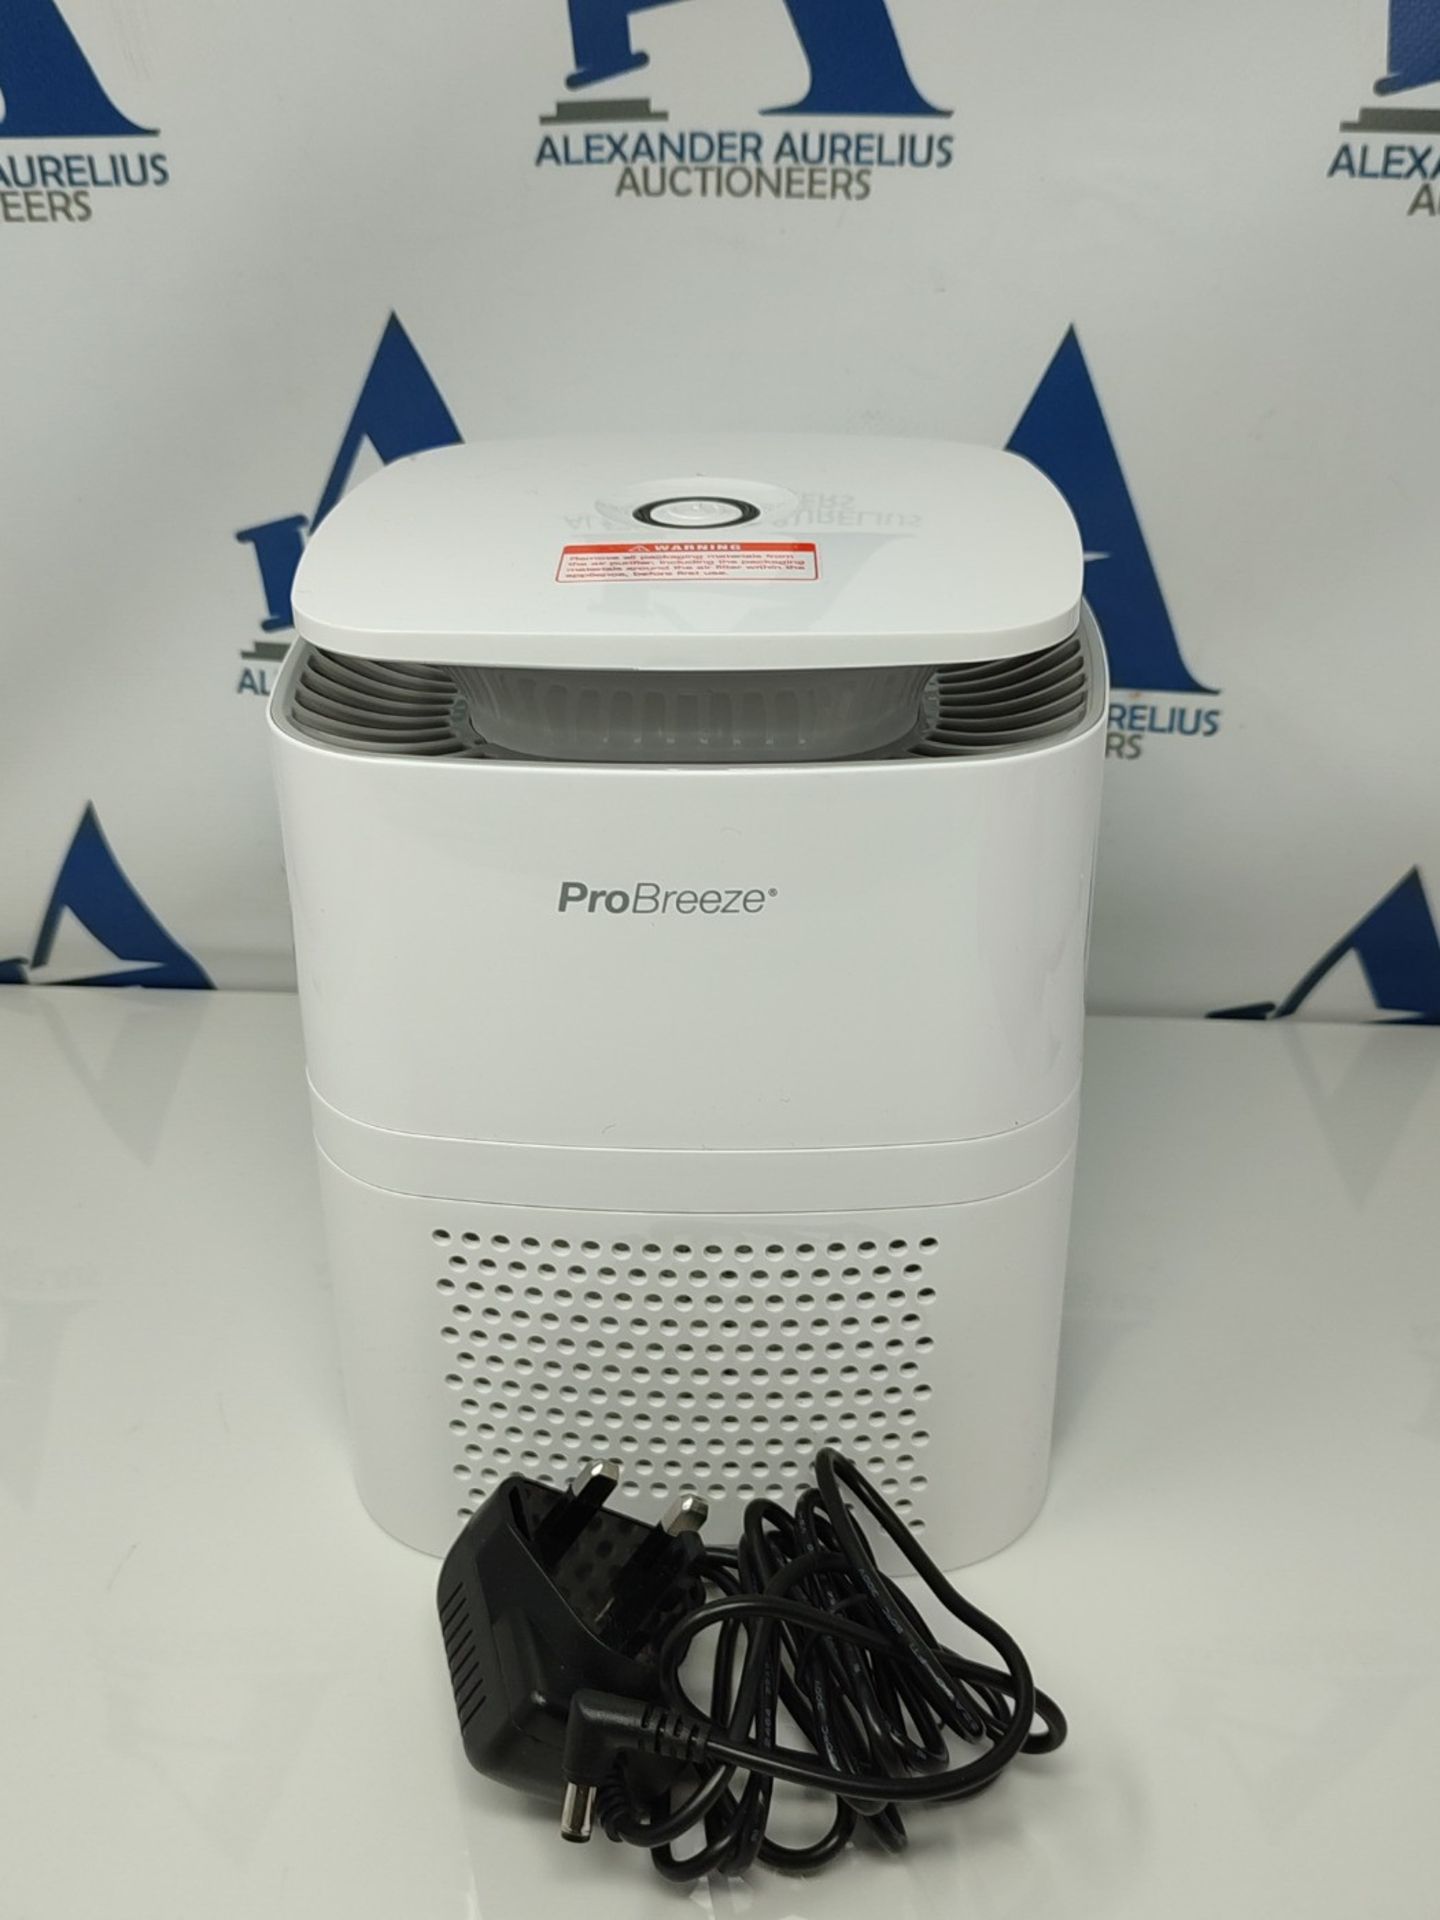 Pro Breeze® Air Purifier for Home, 4-in-1 with Pre, True HEPA & Active Carbon Filter - Image 2 of 2